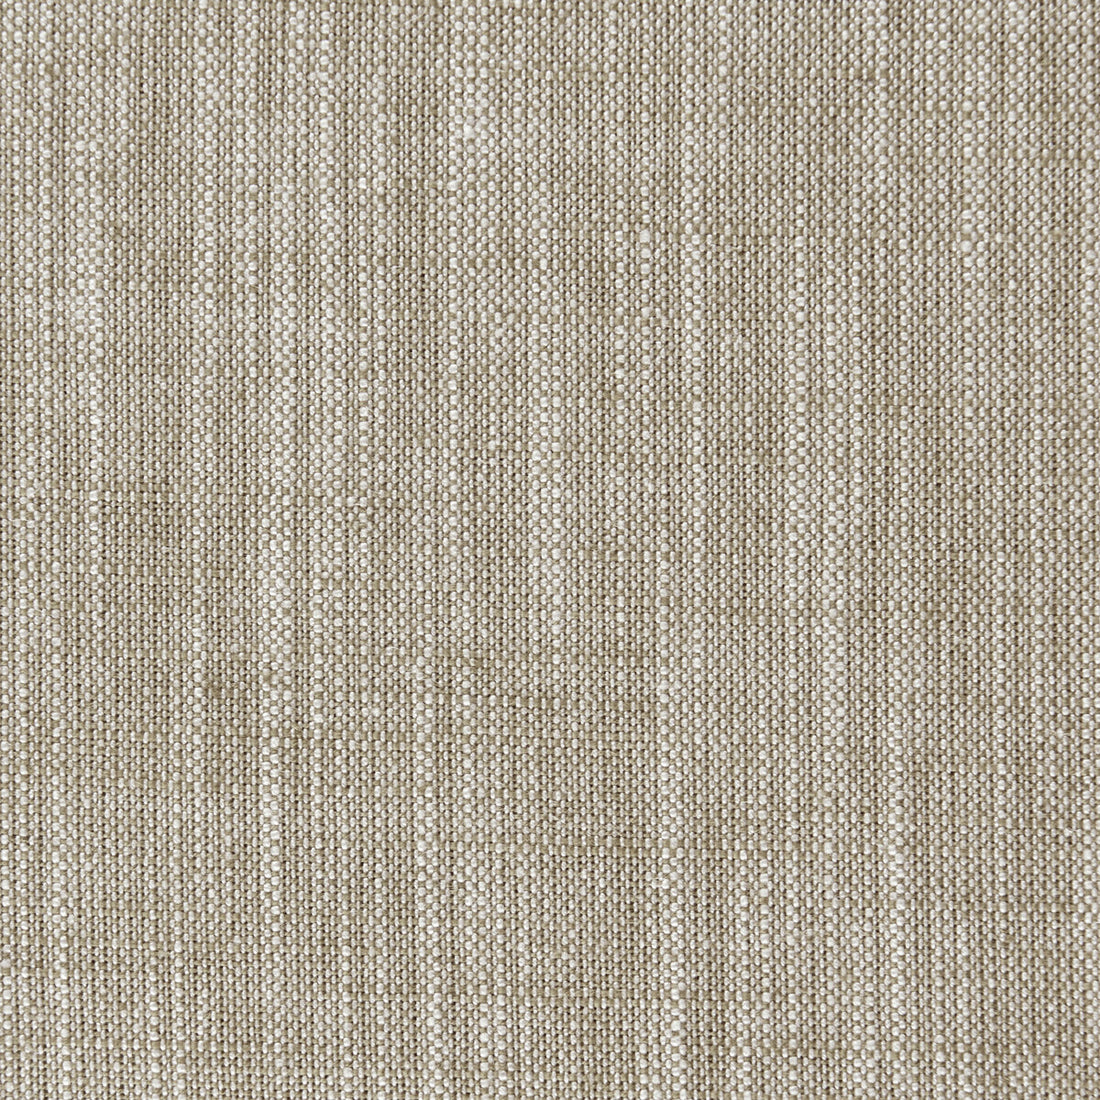 Biarritz fabric in cappuccino color - pattern F0965/07.CAC.0 - by Clarke And Clarke in the Clarke &amp; Clarke Biarritz collection